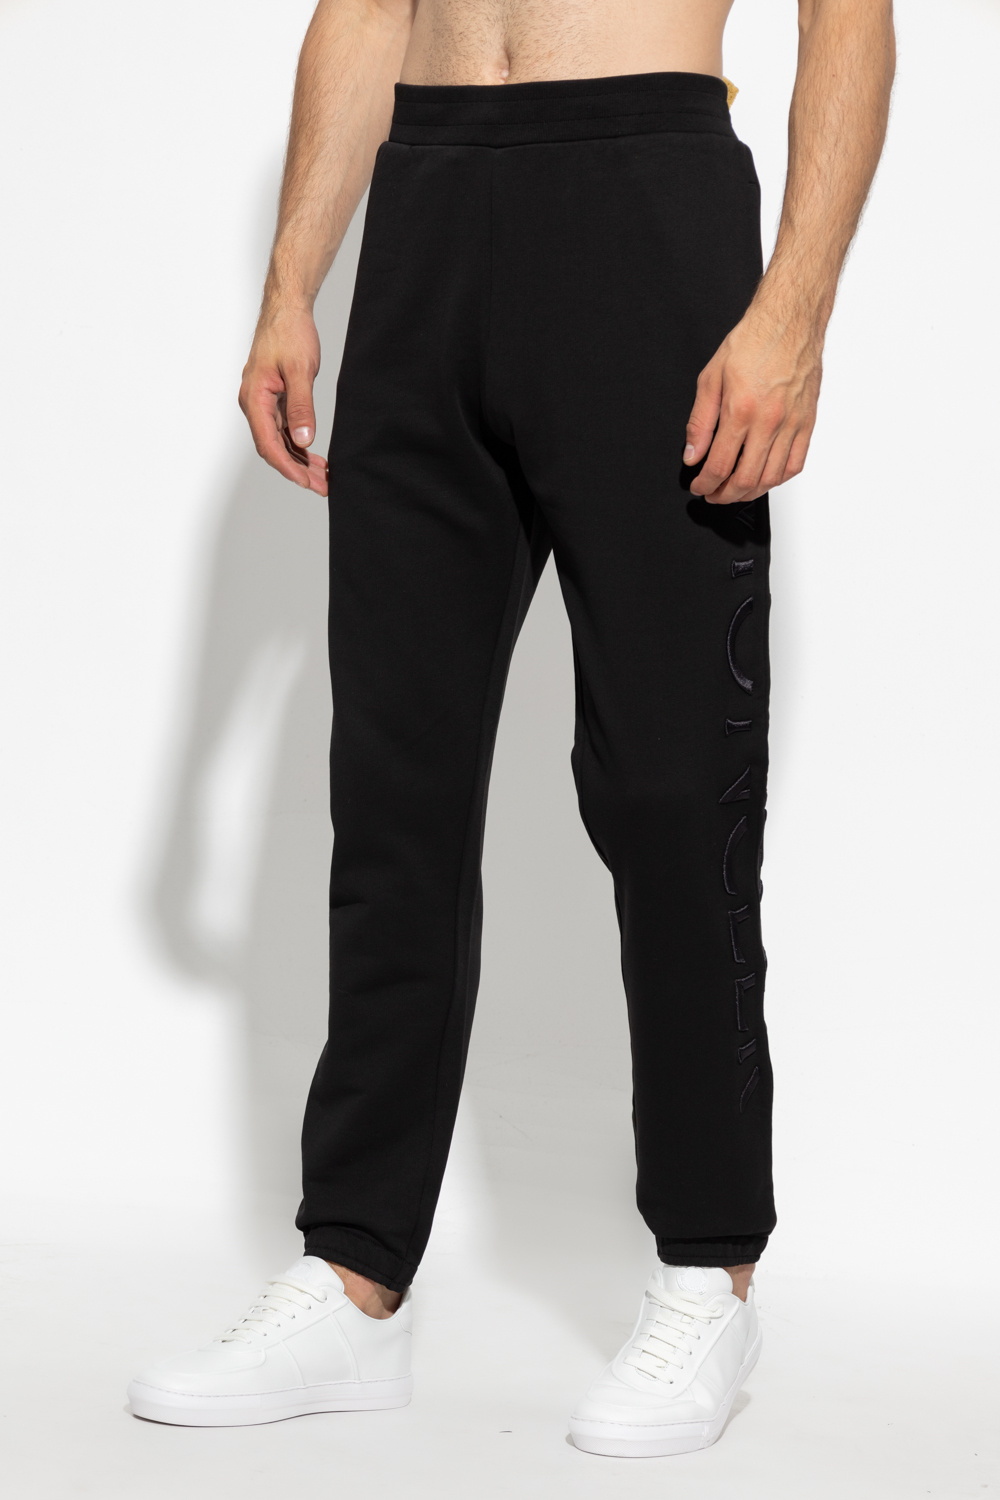 Moncler Add some retro flare to your athleisure looks with these classic navy track pants from